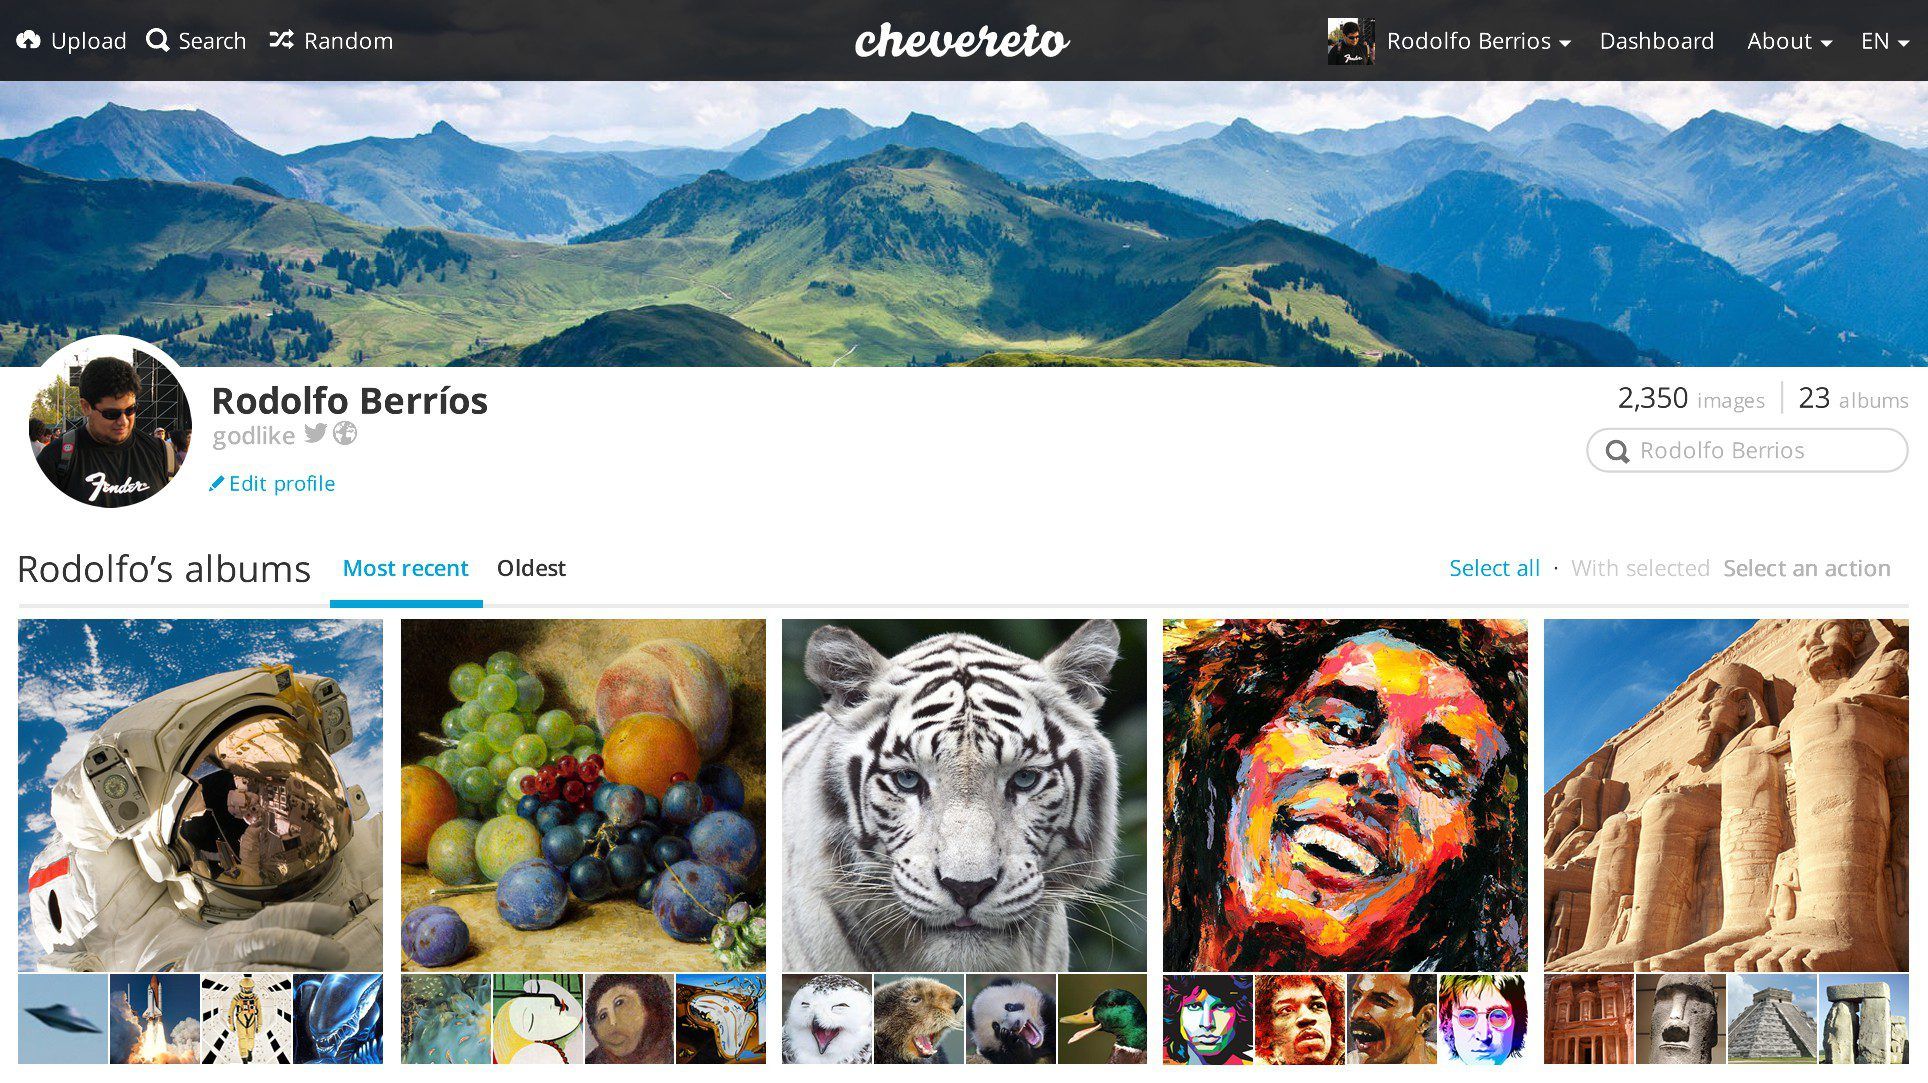 Chevereto: An Image Hosting CMS With a Tempting Arvixe Hosting Bundle